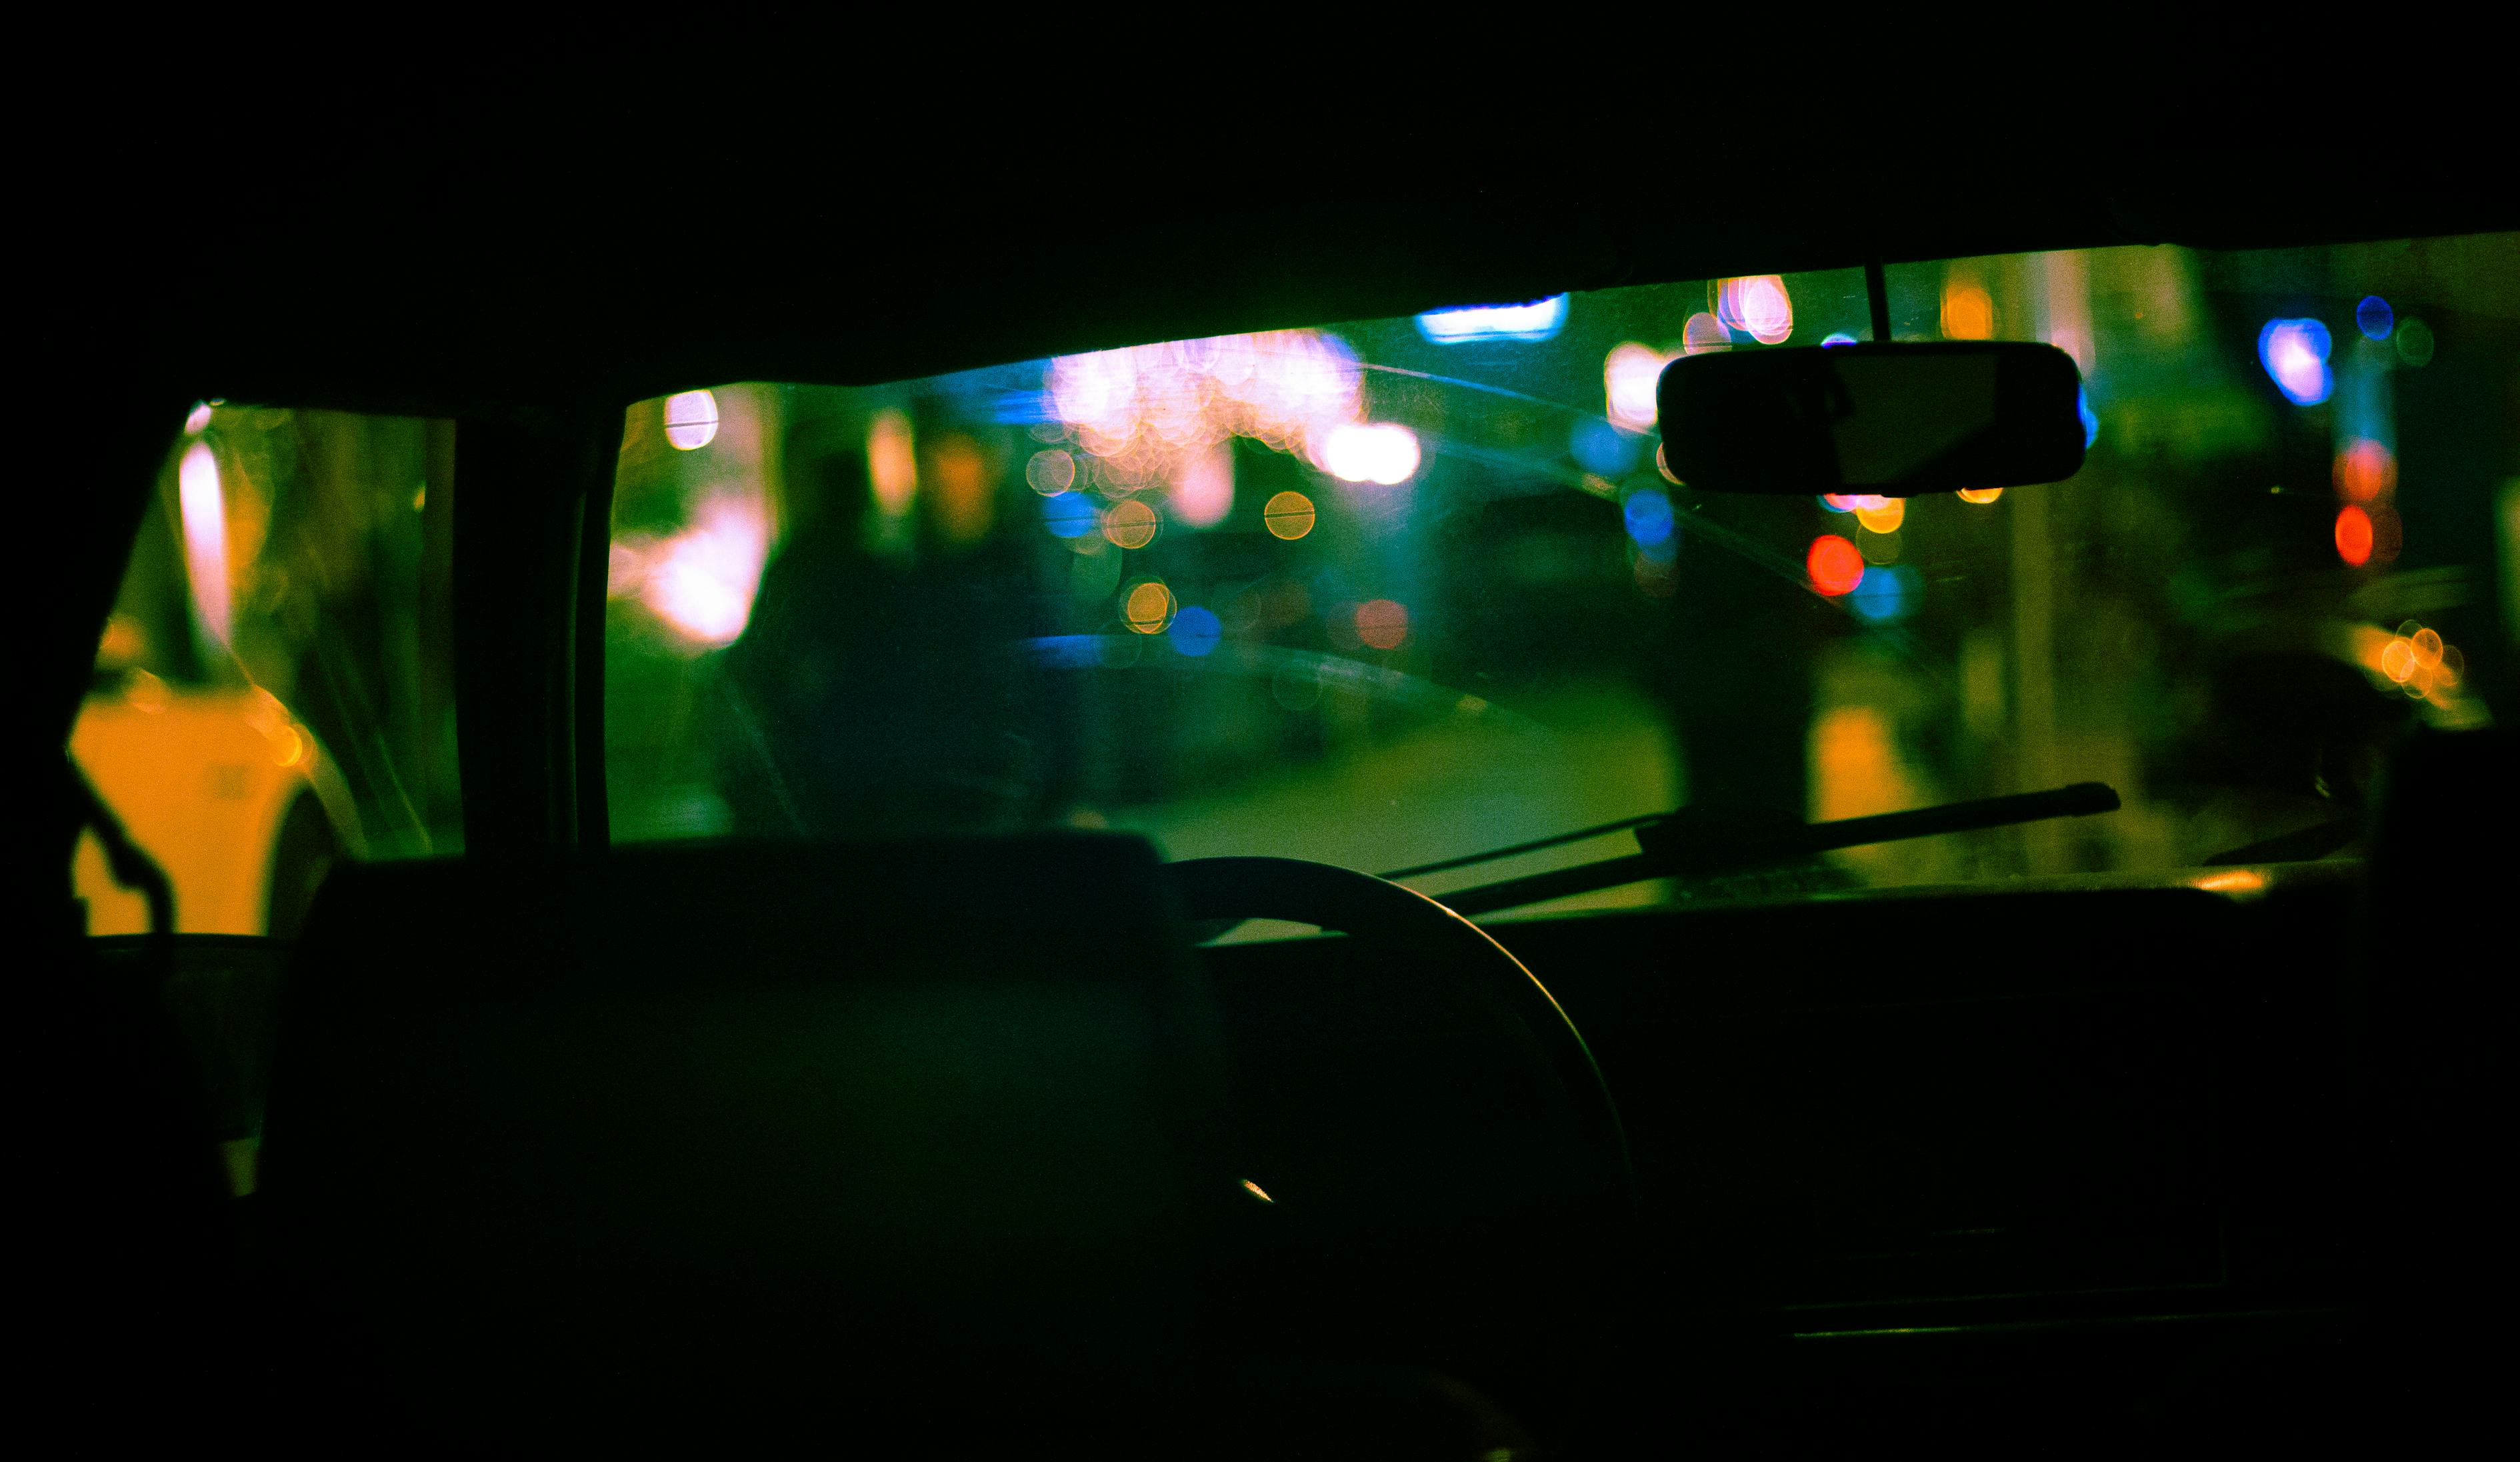 Car on Road during Night Time · Free Stock Photo